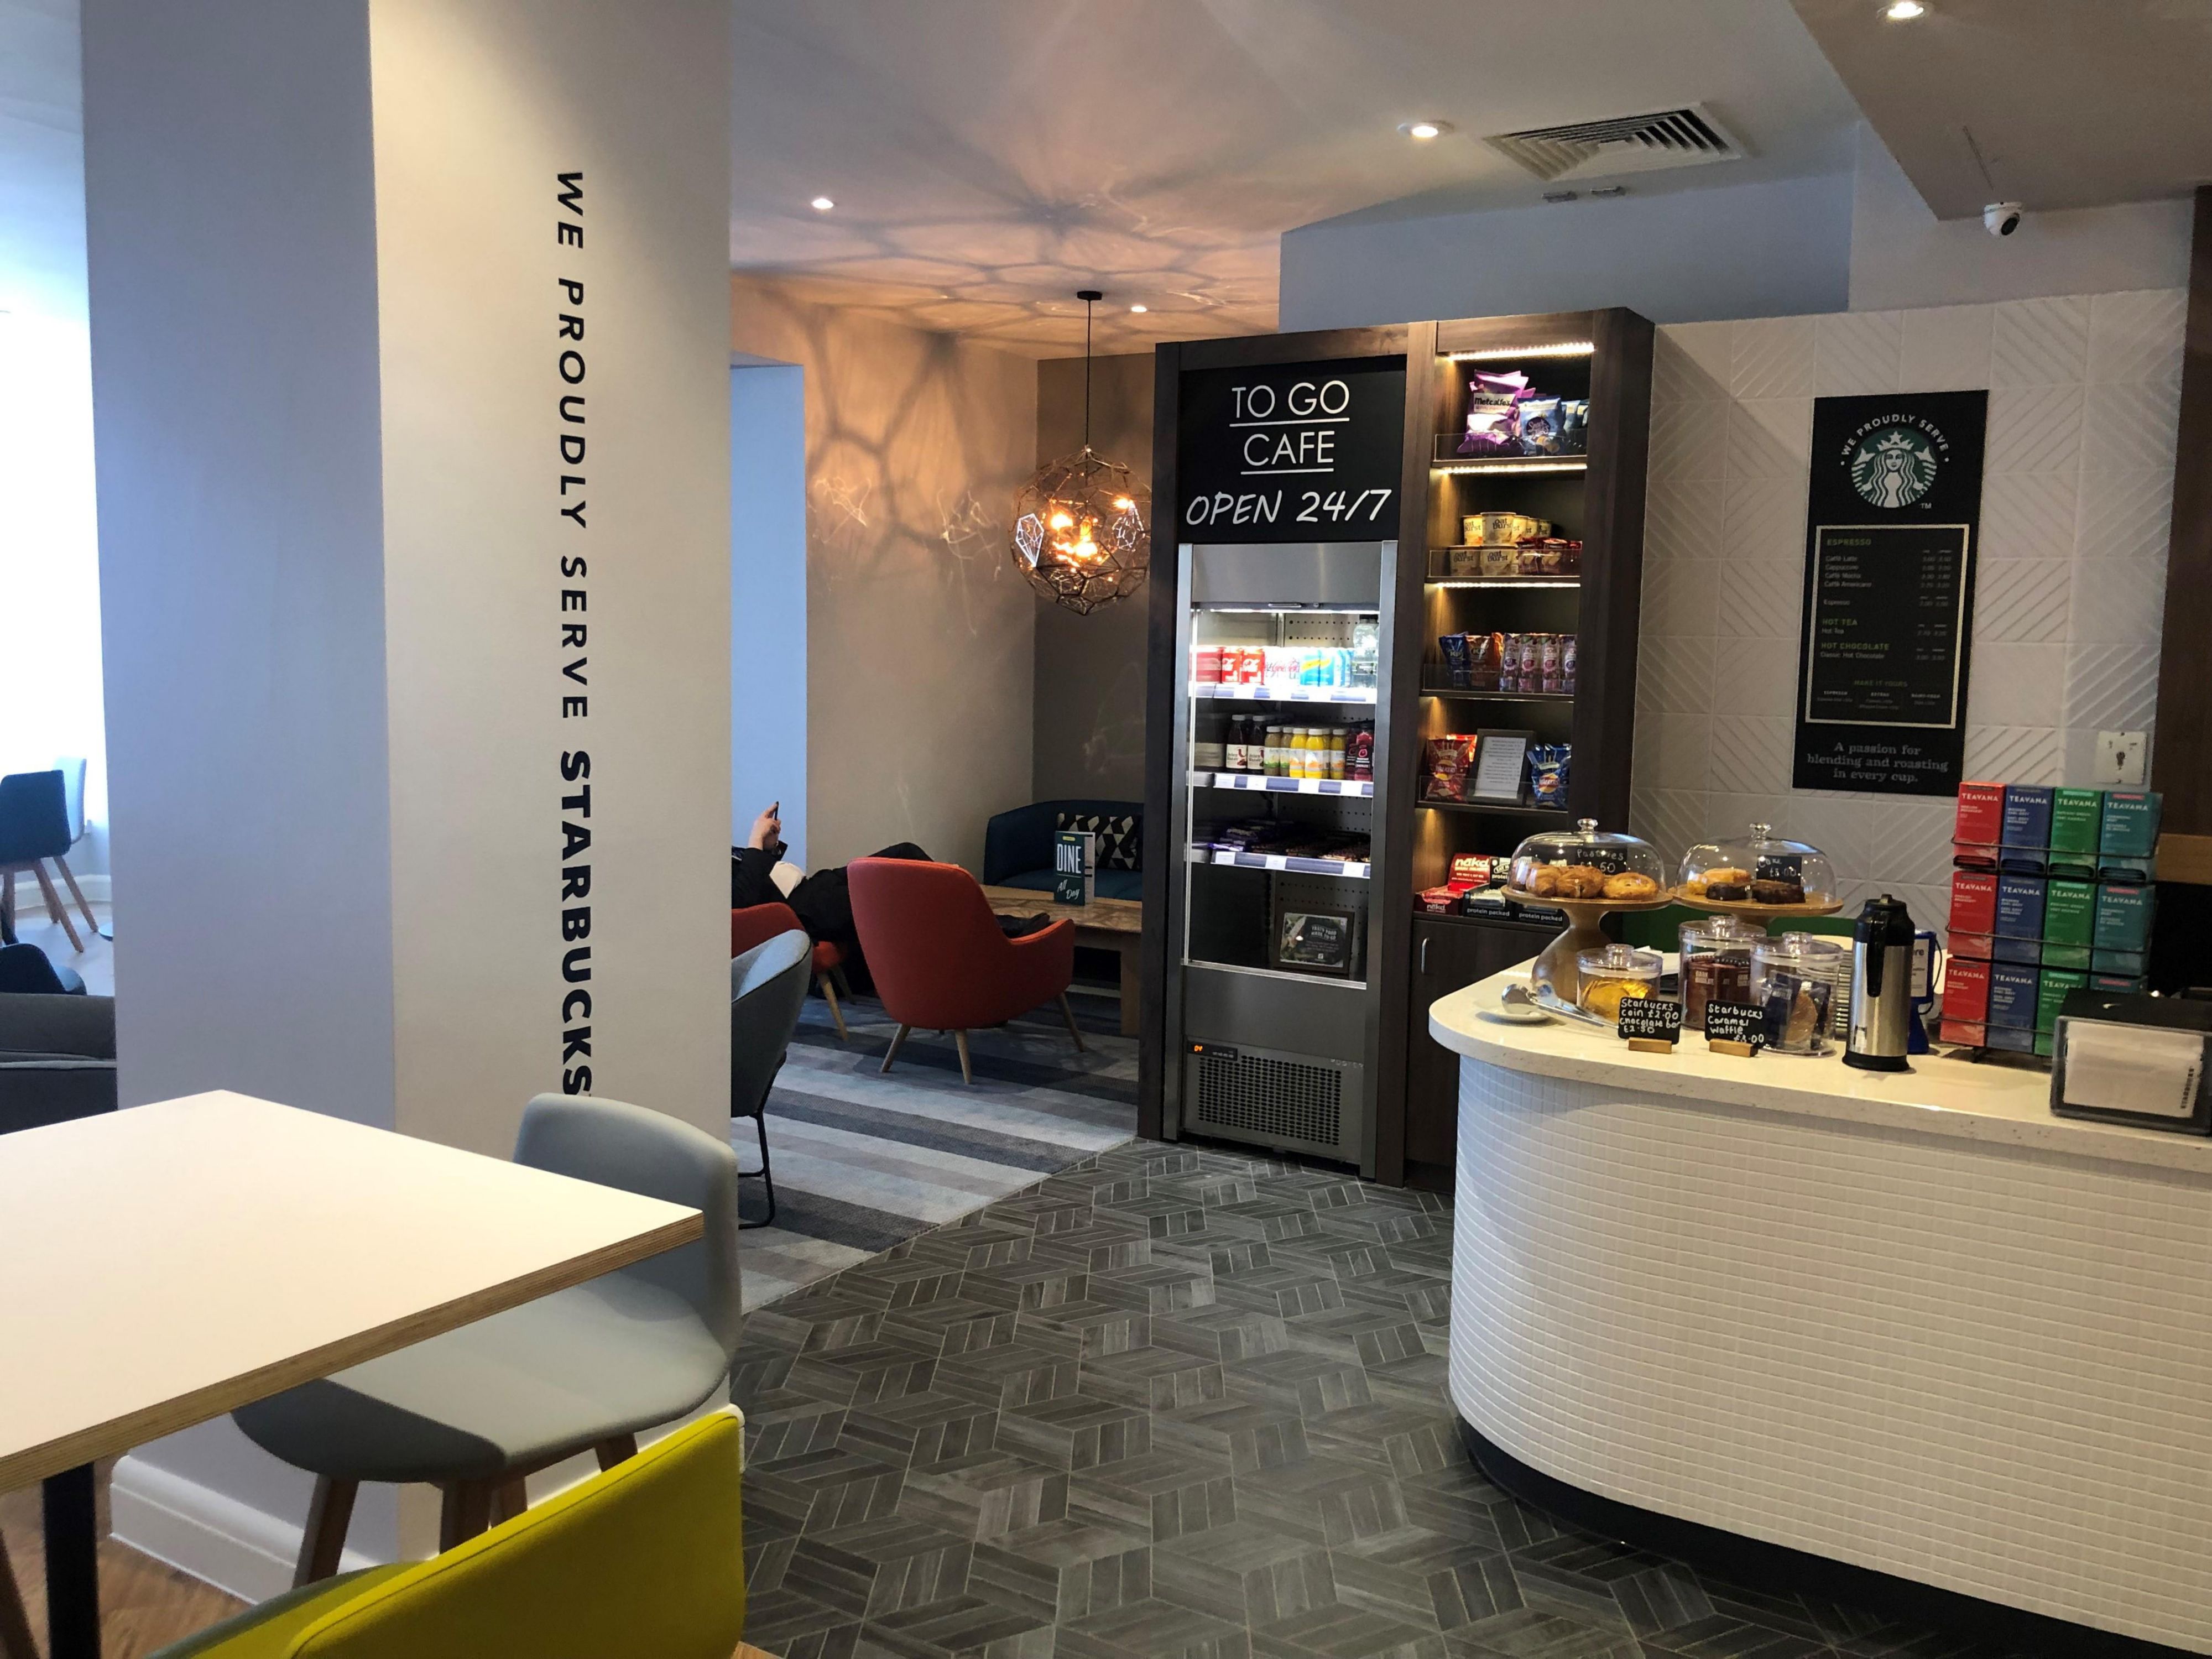 Our  Open Lobbyspace is fresh and stylish, incorporating vibrant colours, locally inspired artwork and contemporary furnishings to create the ultimate chill out space.

Introducing an all-day dining menu, a 24/7 to go cafe for guests on the move with Starbucks coffee, free WiFi and Mac PC